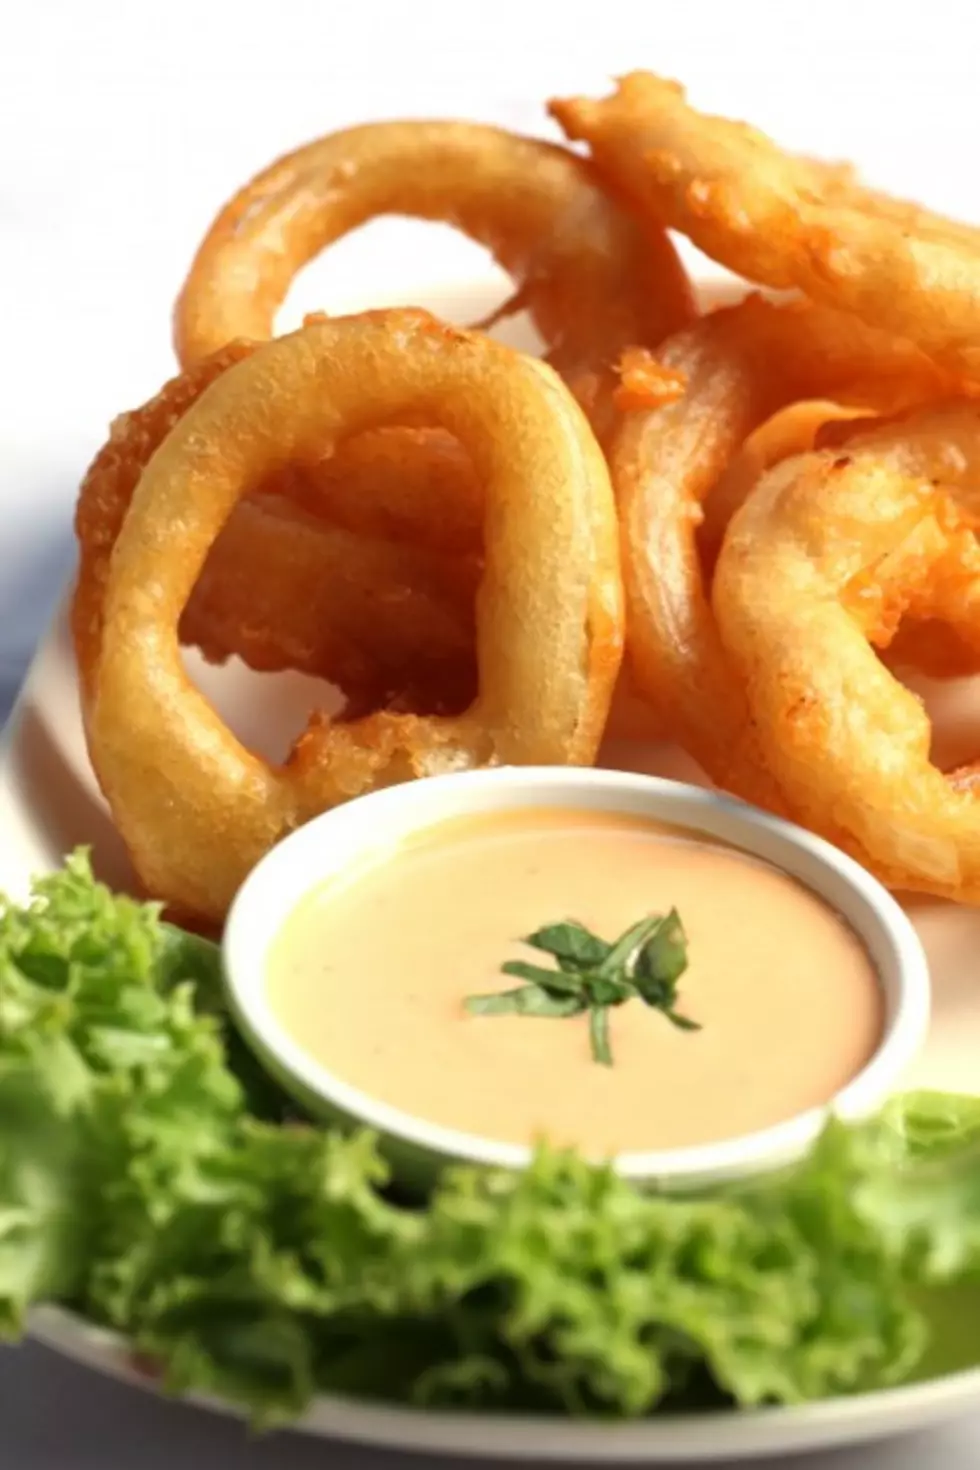 Jon Prell Shares His Secrets for the Best Onion Rings Ever